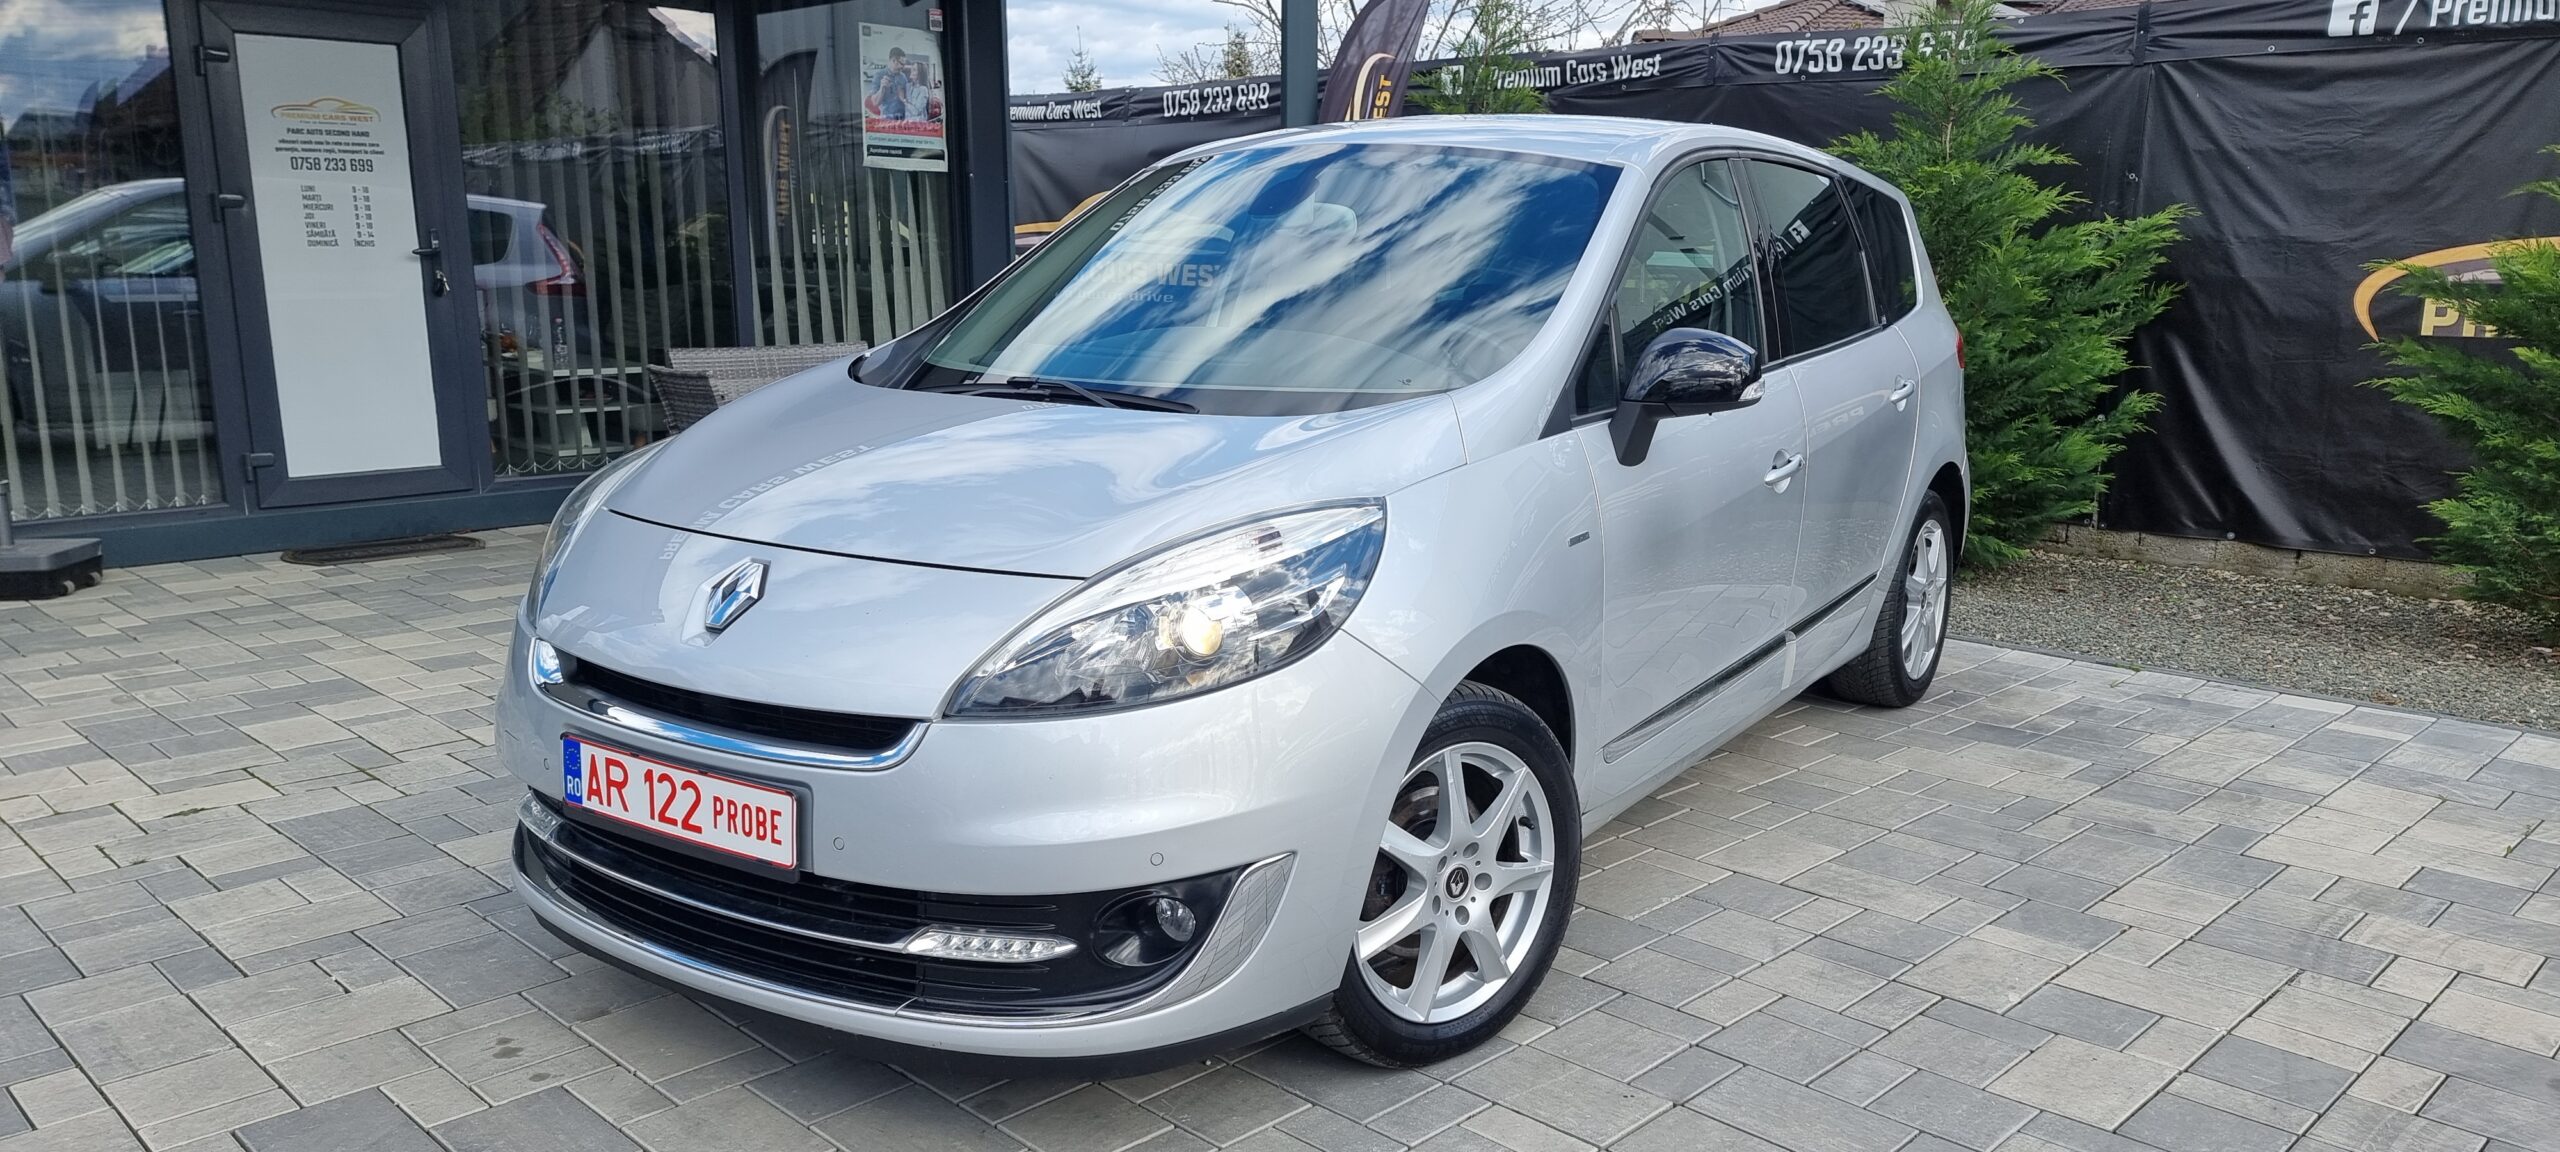 RENAULT GRAND SCENIC, 1.5 DIESEL, 110 CP, EURO 5, AN 2012